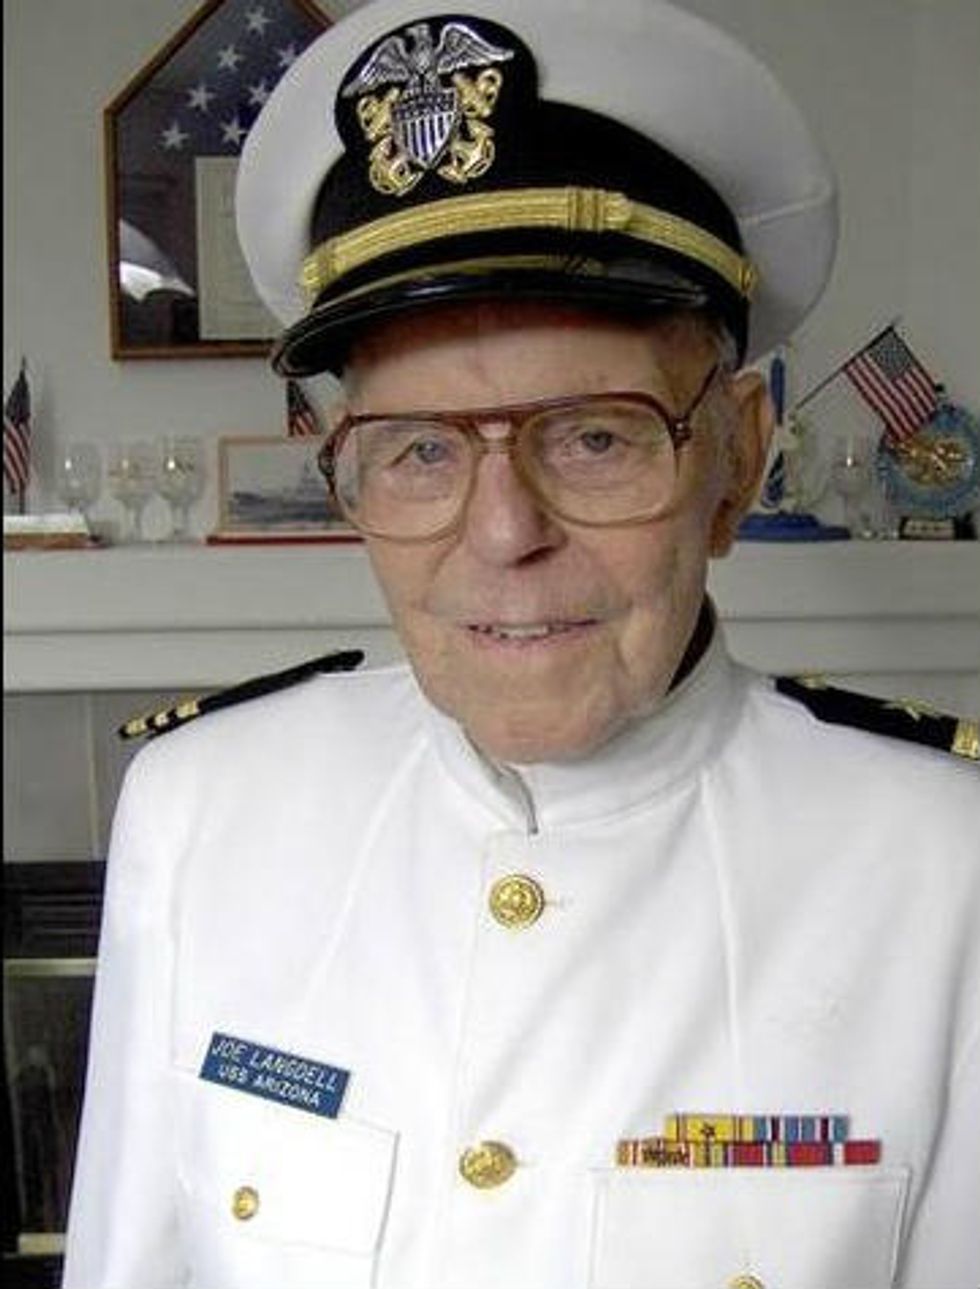 Last Known Pearl Harbor Battleship Officer Has Died at 100